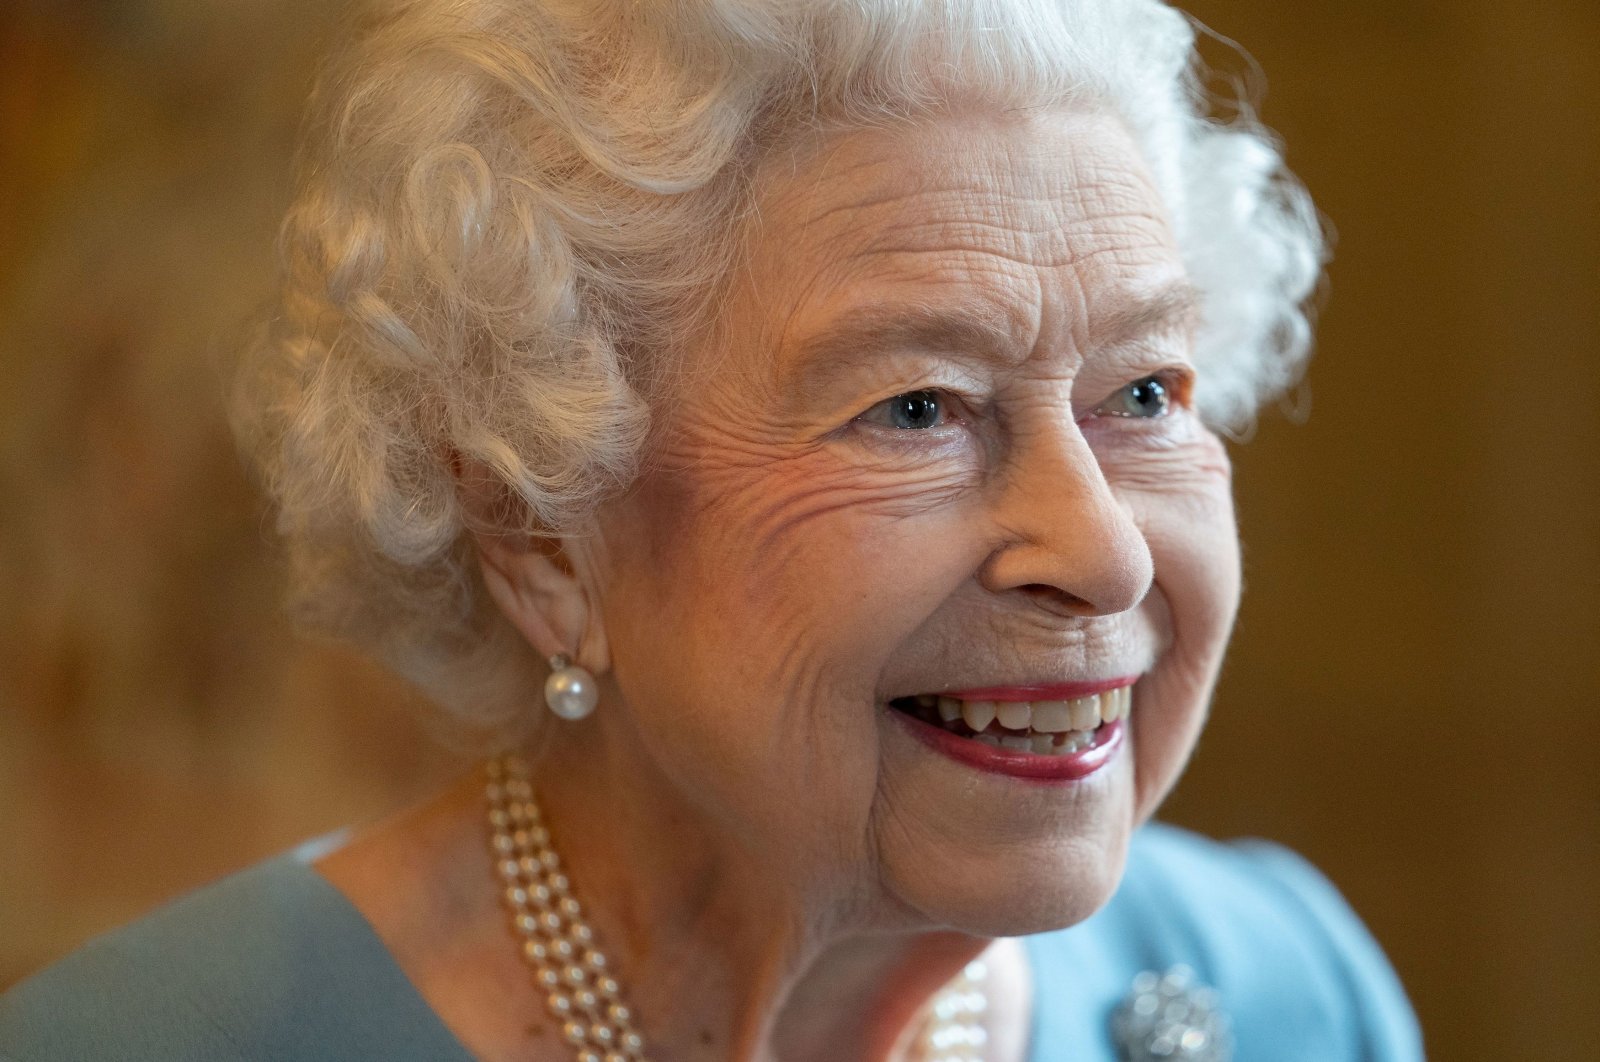 Britain&#039;s Queen Elizabeth attends a reception with representatives from local community groups to celebrate the start of the Platinum Jubilee, at the Ballroom of Sandringham House, which is the Queen&#039;s Norfolk residence, in Sandringham, Britain, Feb. 5, 2022. (Joe Giddens/Pool via REUTERS)